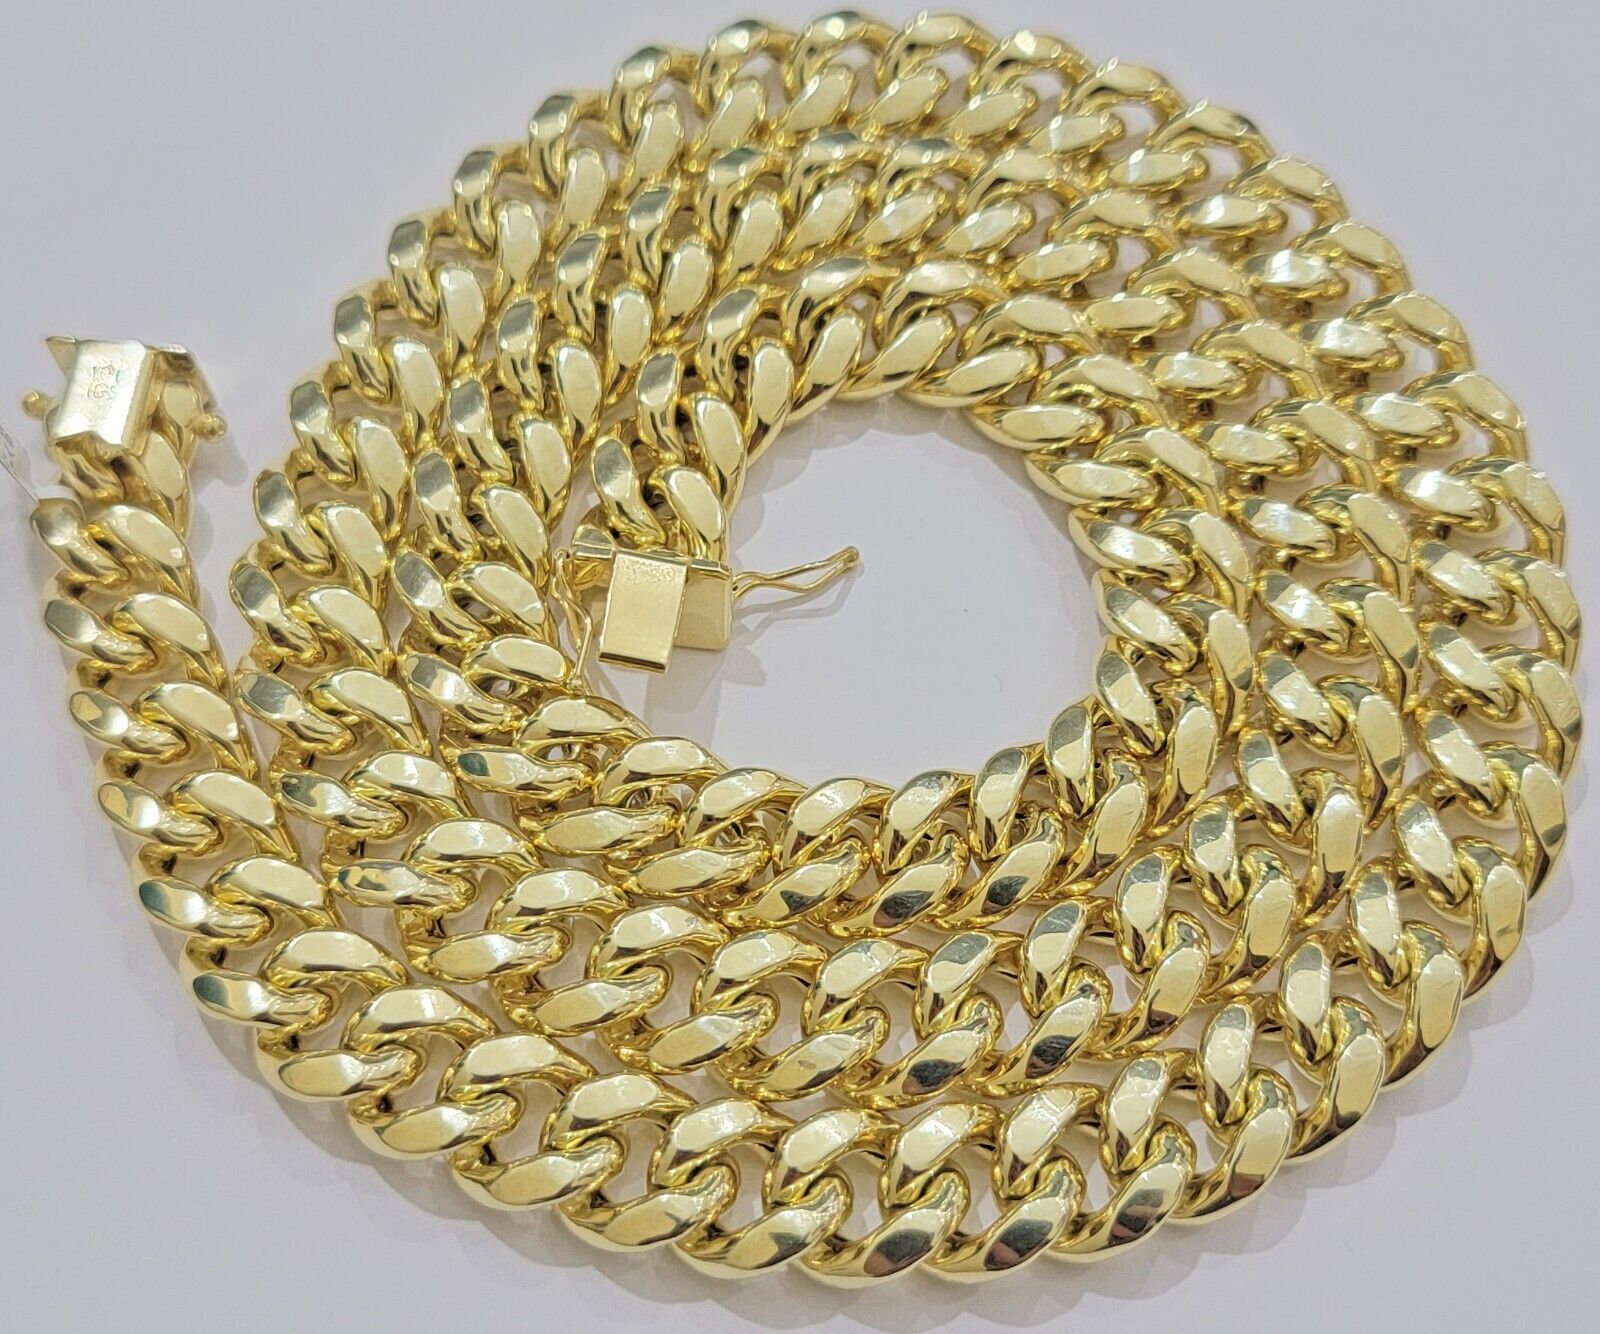 12mm Cuban Link Chain 10k Yellow Gold Mens Necklace 26